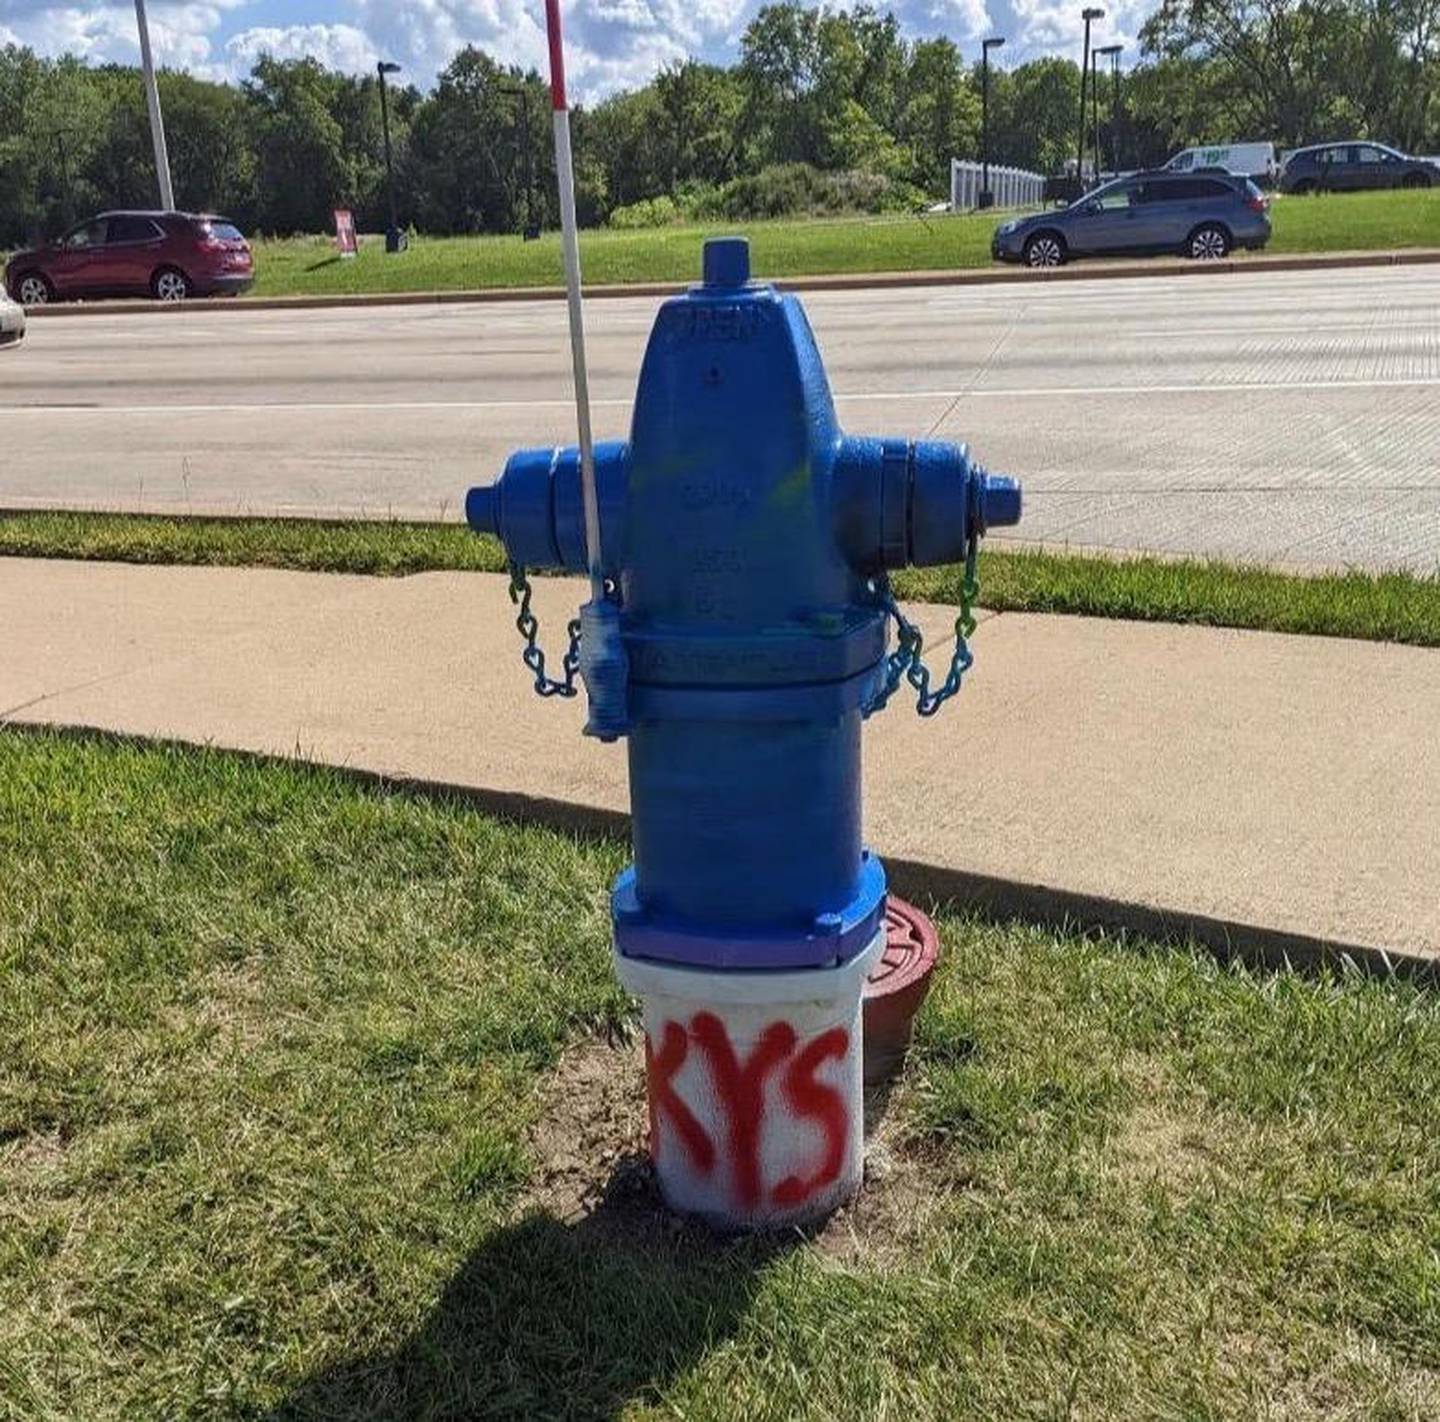 After a suspect was charged with defacing city property on Friday, the pride and transgender-painted hydrant at Kirk Road and State Street was defaced again. The artist and friends repainted it.